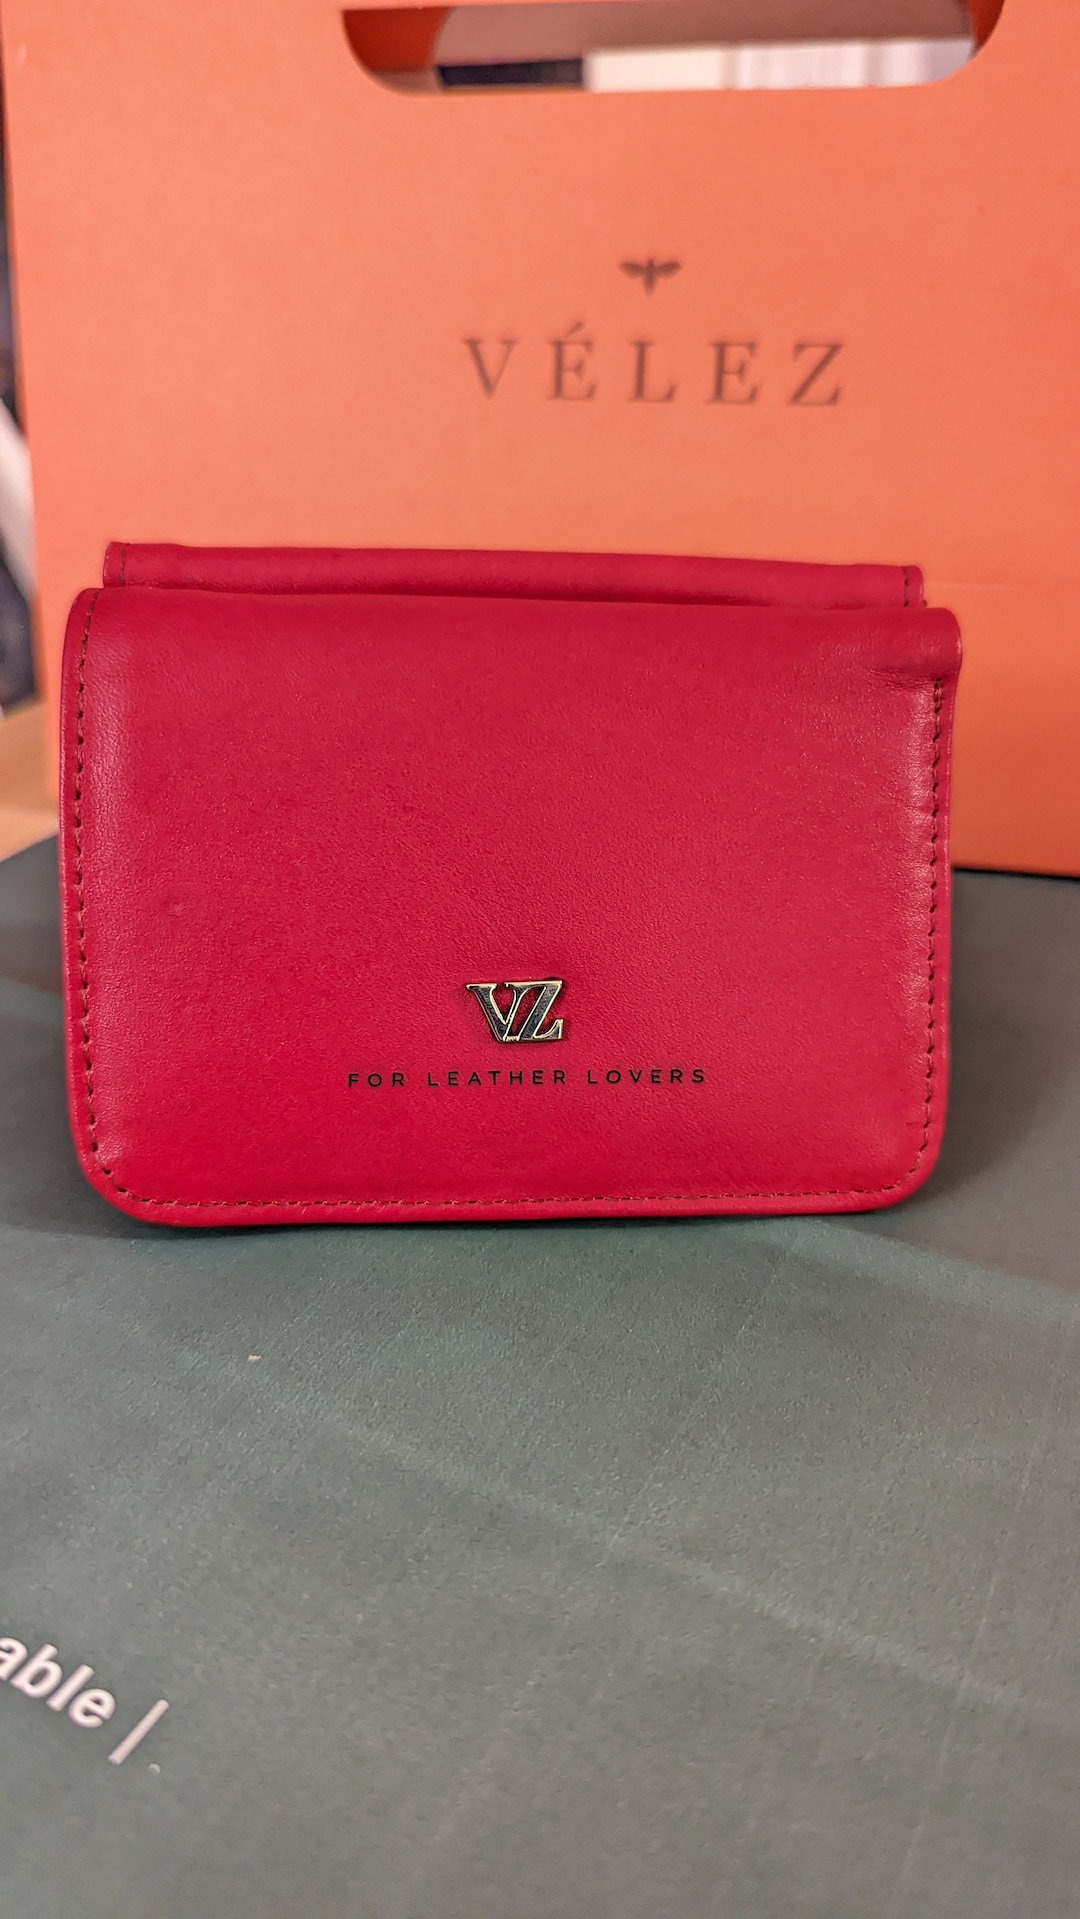 VELEZ Small Wallet for Women - Tan Full Grain Leather Wallet - Trifold RFID  Blocking Wallet - Slim Wallet with Coin Purse